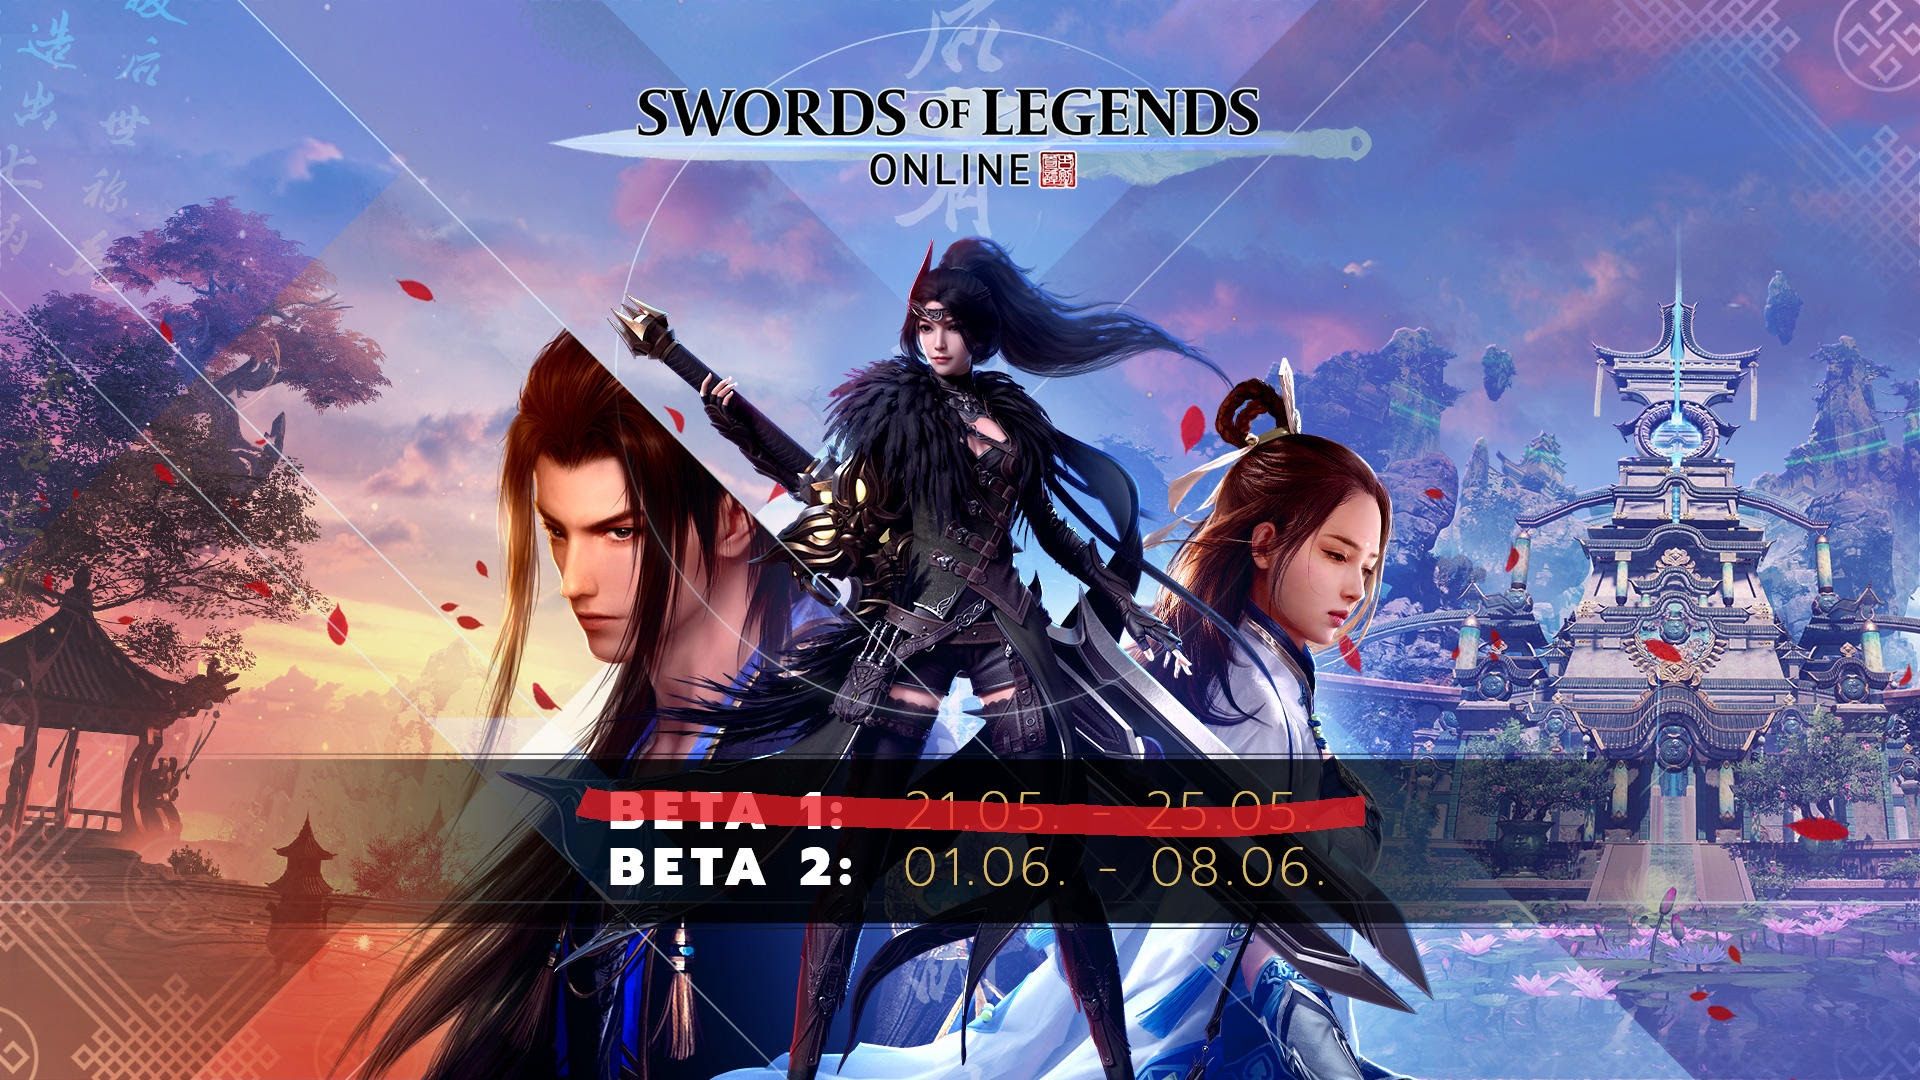 Swords of Legends Online CBT2 Giveaway Out This Xianxia Themed MMORPG